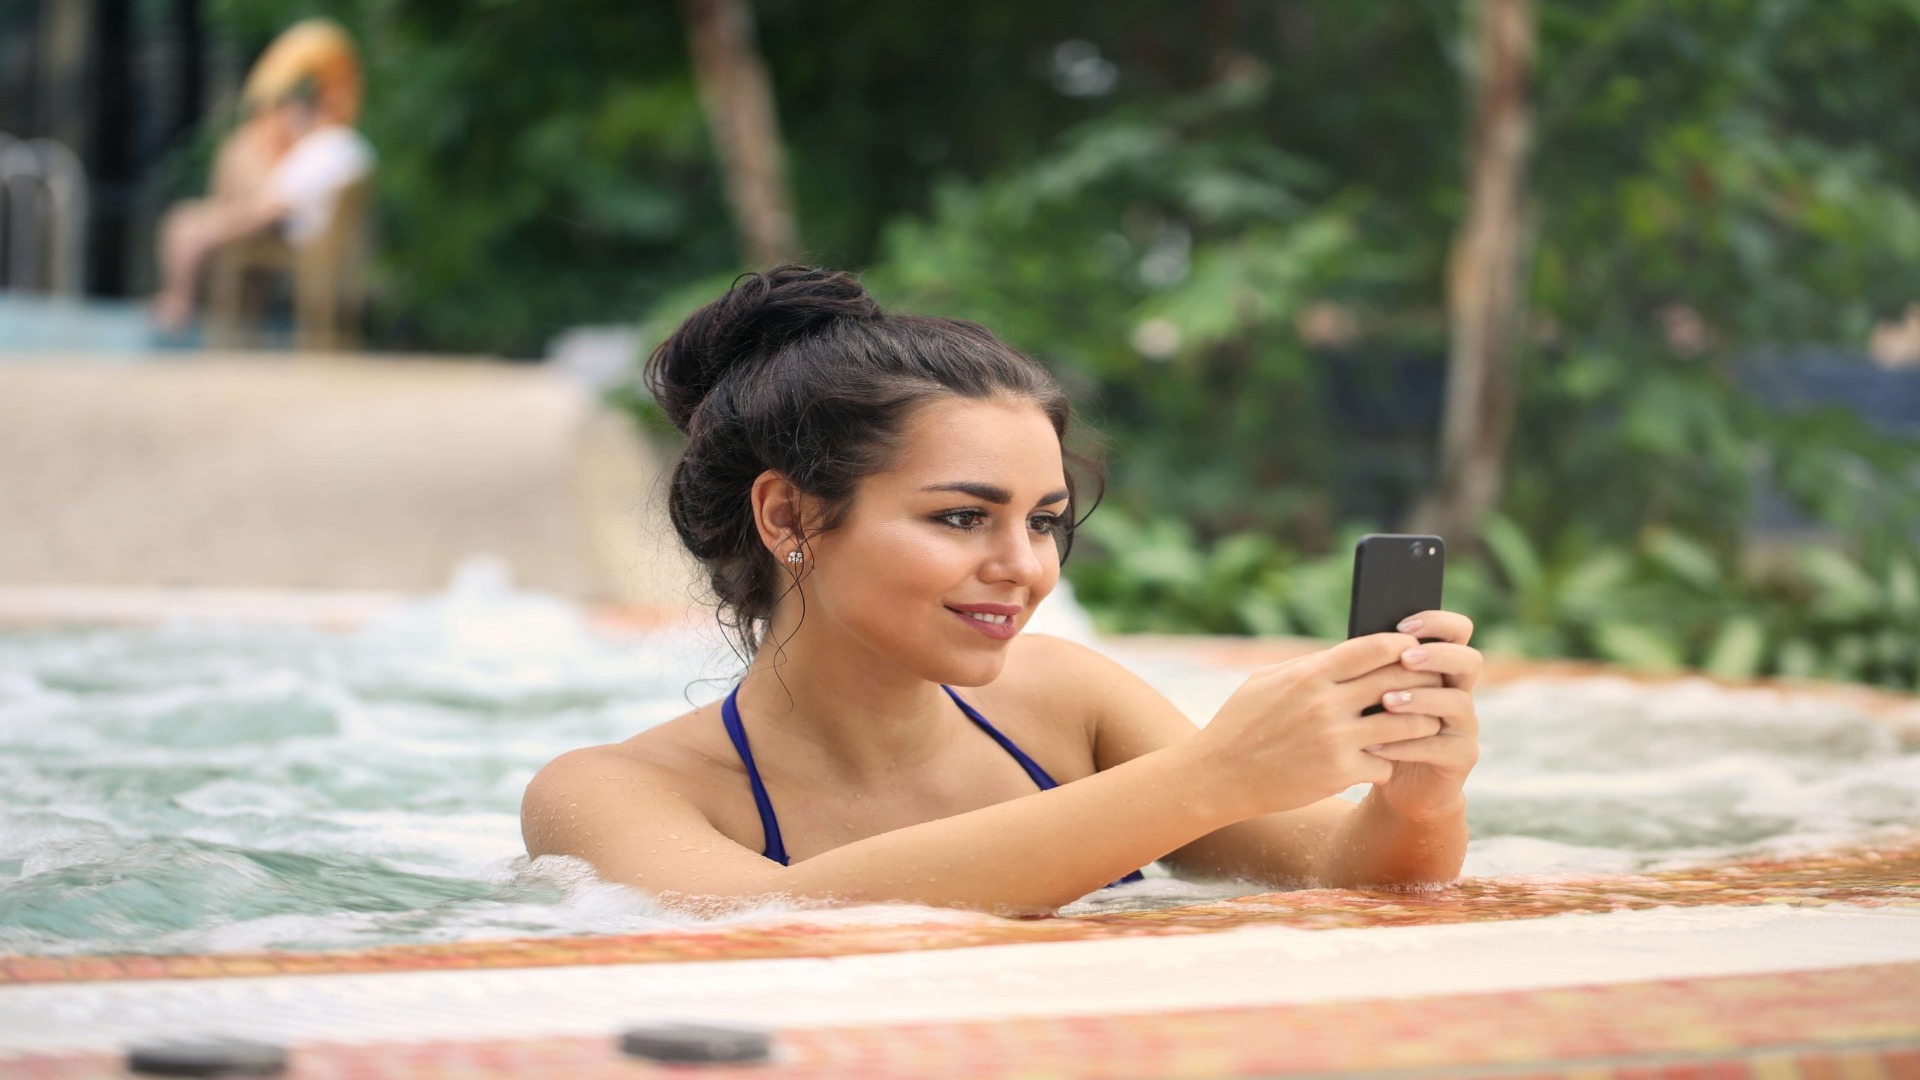 Woman In Swimming Pool With Her Phone